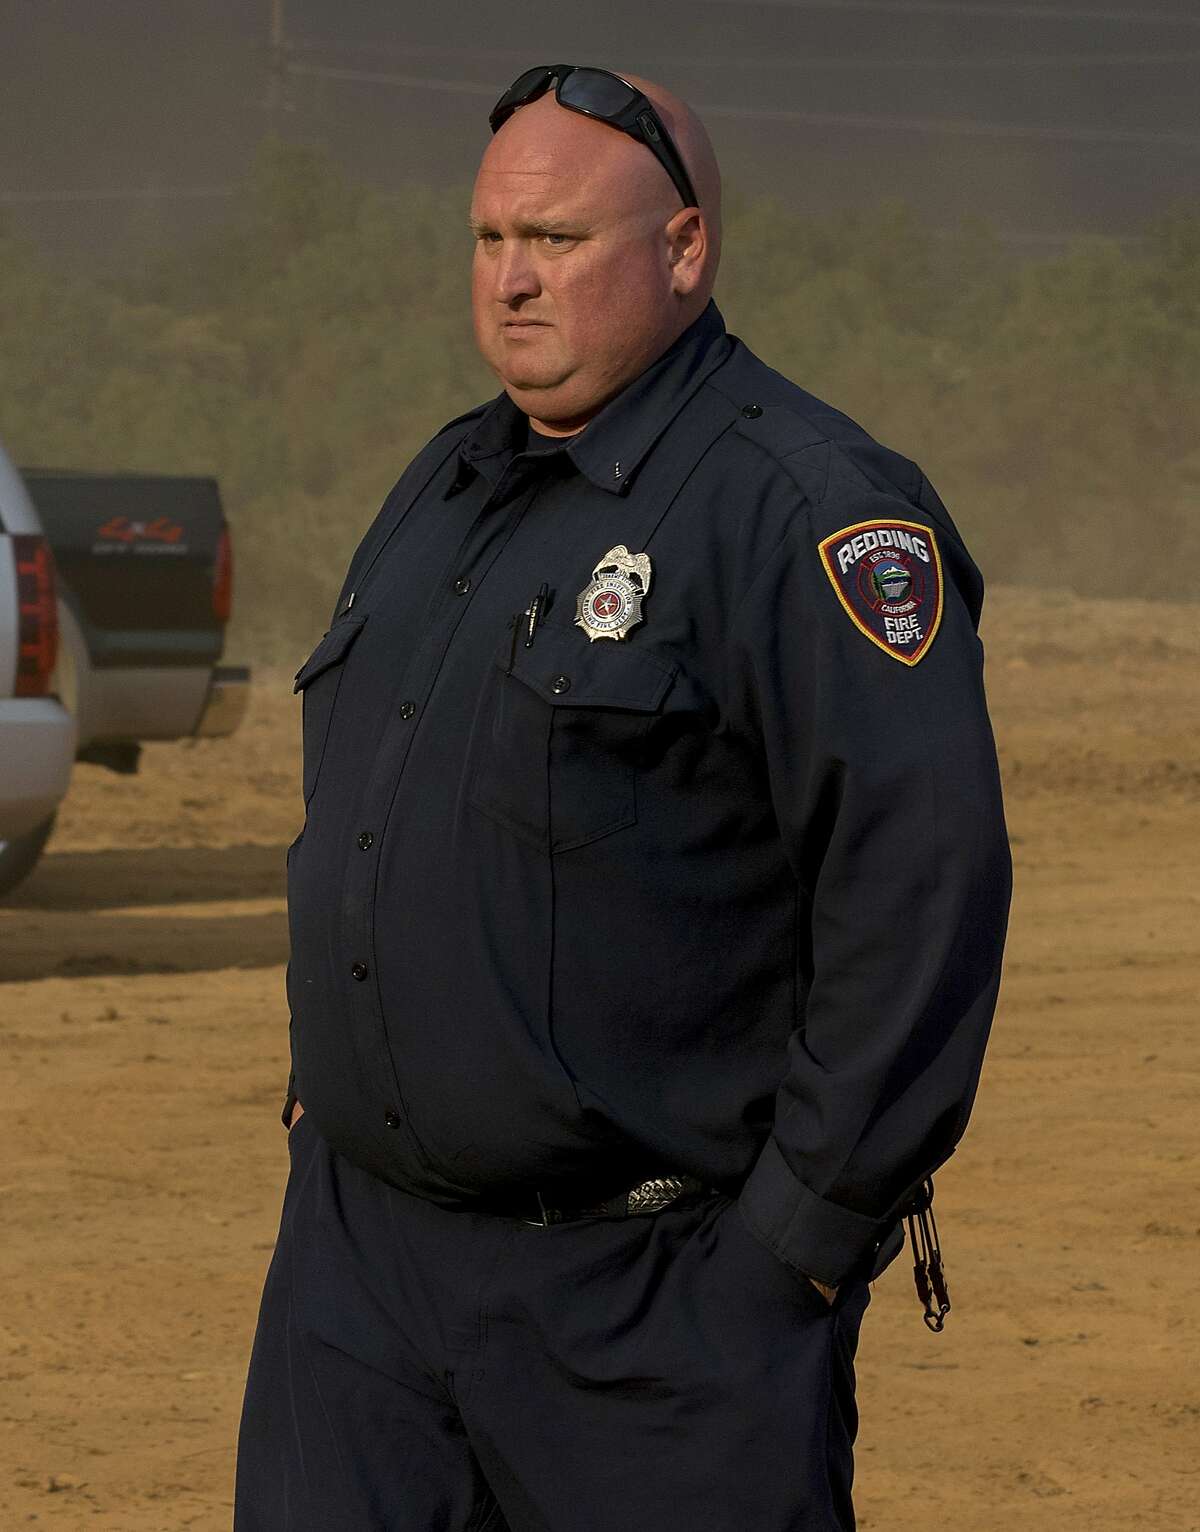 FILE - This Thursday, June 26, 2018, file photo released by Casey Lansdon shows Redding fire inspector Jeremy Stoke in Redding, Calif. The California Department of Forestry and Fire Protection says in a report that Redding firefighter Stoke died after he was enveloped in seconds by a fire tornado with a base the size of three football fields and winds up to 165 mph. Stoke died July 26, while helping people to evacuate a Northern California blaze. (Casey Lansdon via AP, File)